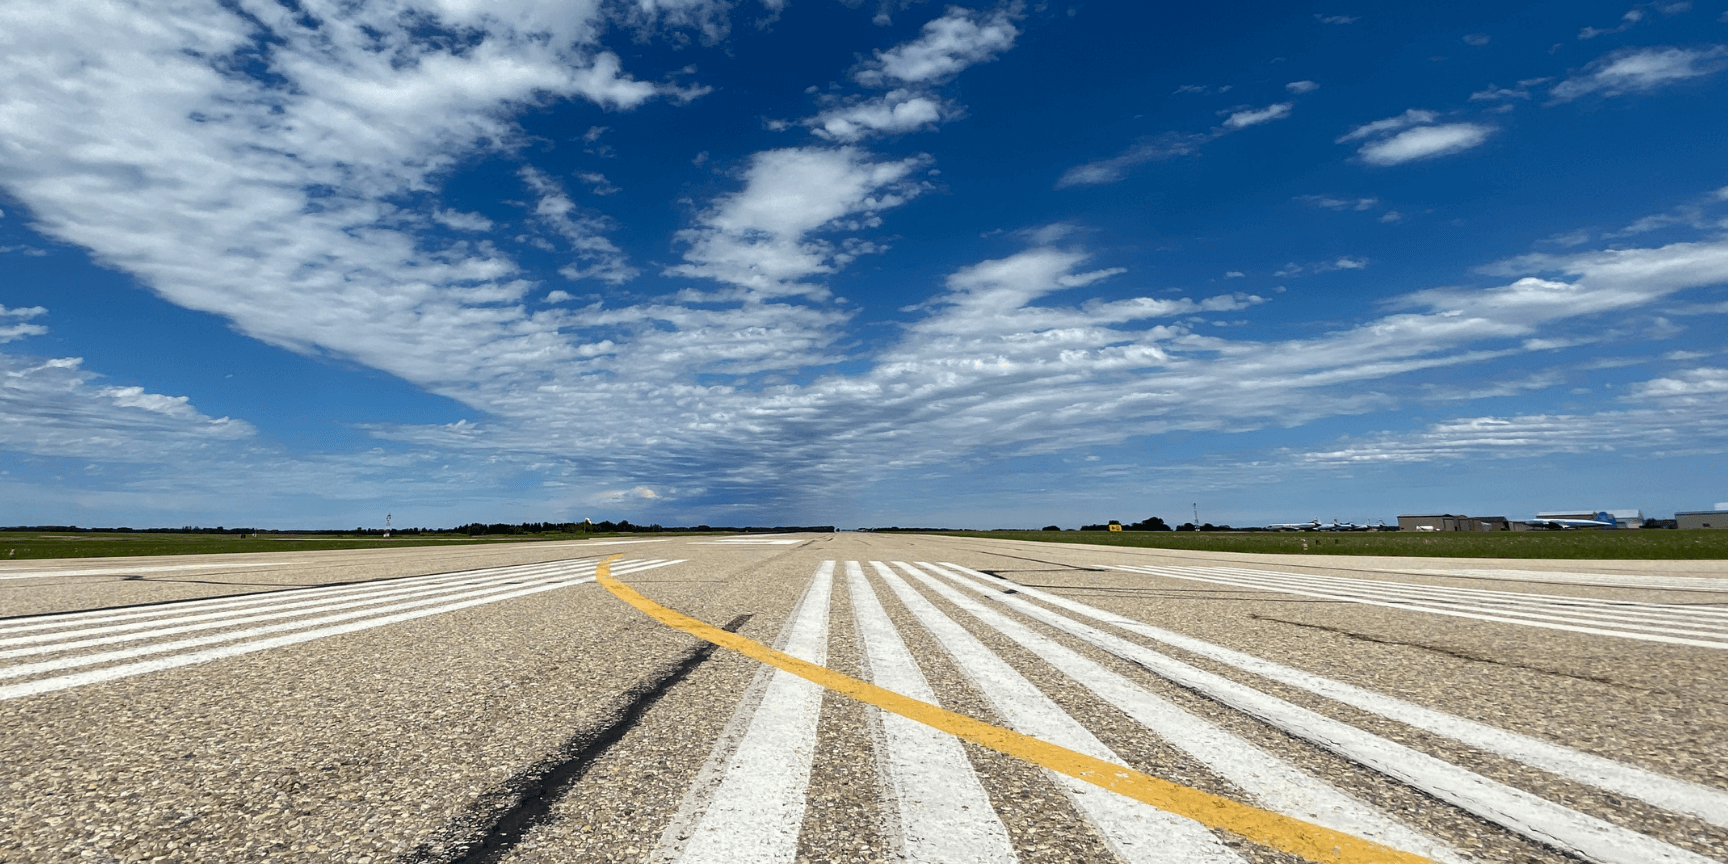 Clouds and blue sky above runway at Red Deer Regional Airport